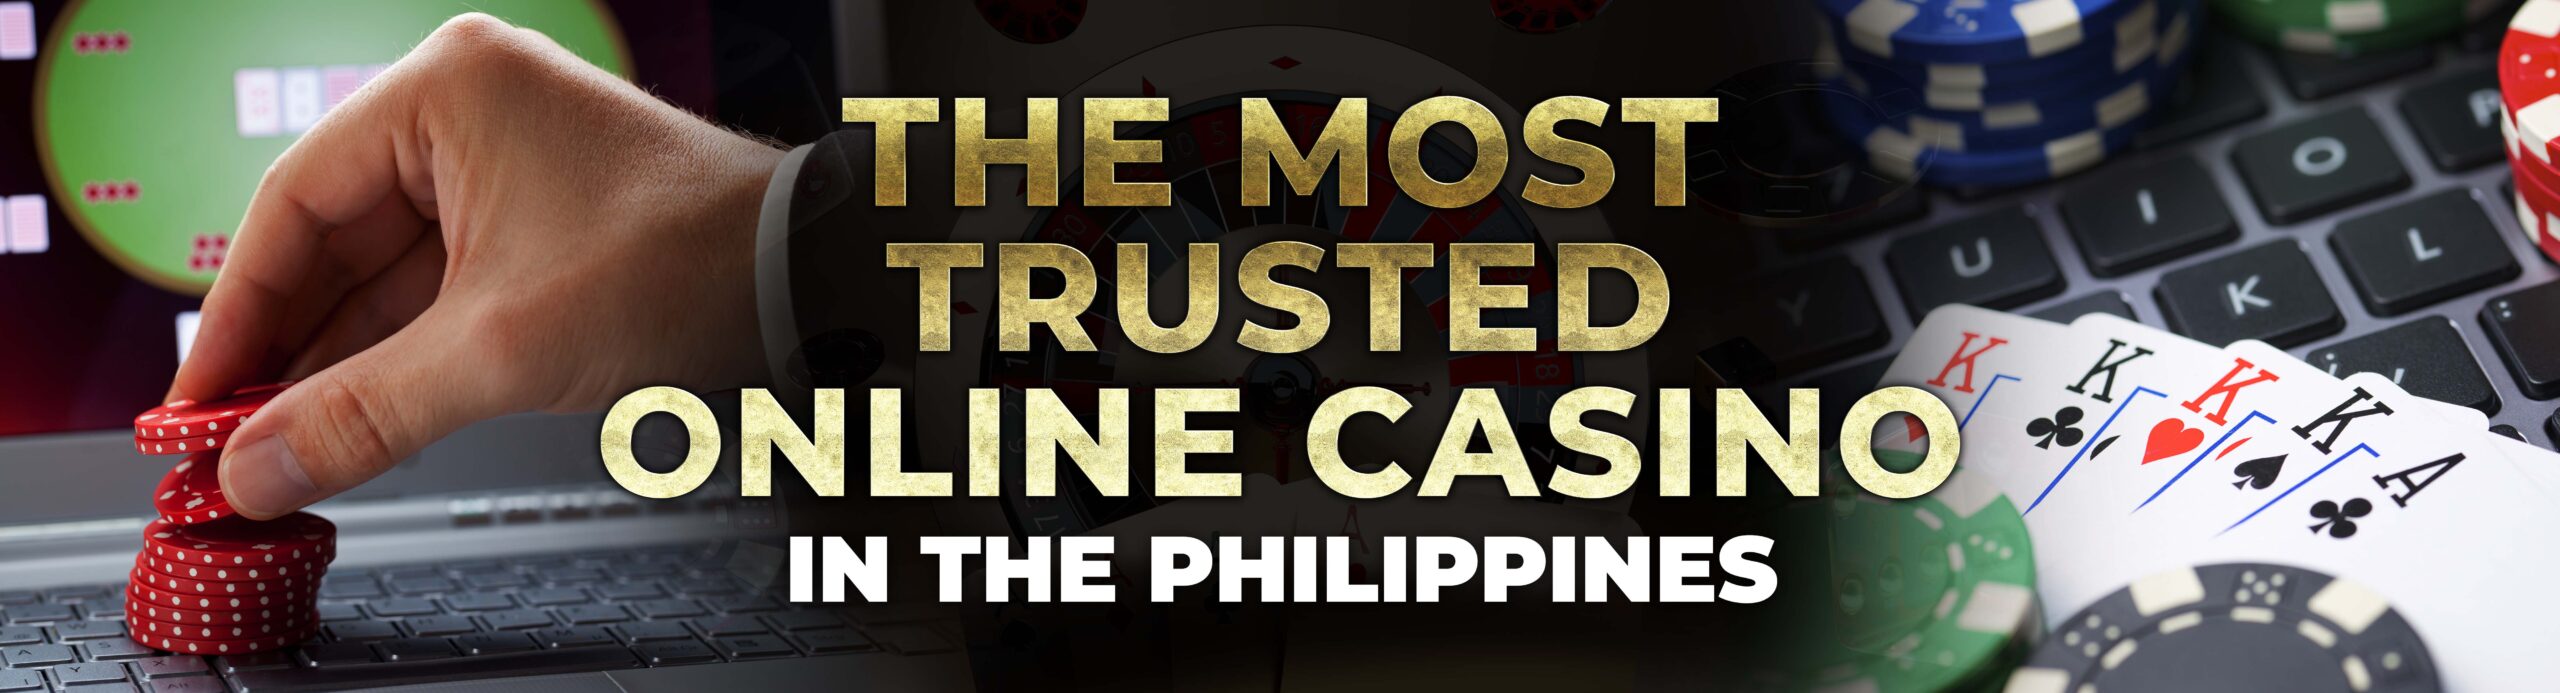 What is the most Trusted Online Casino? - OKBET online casino